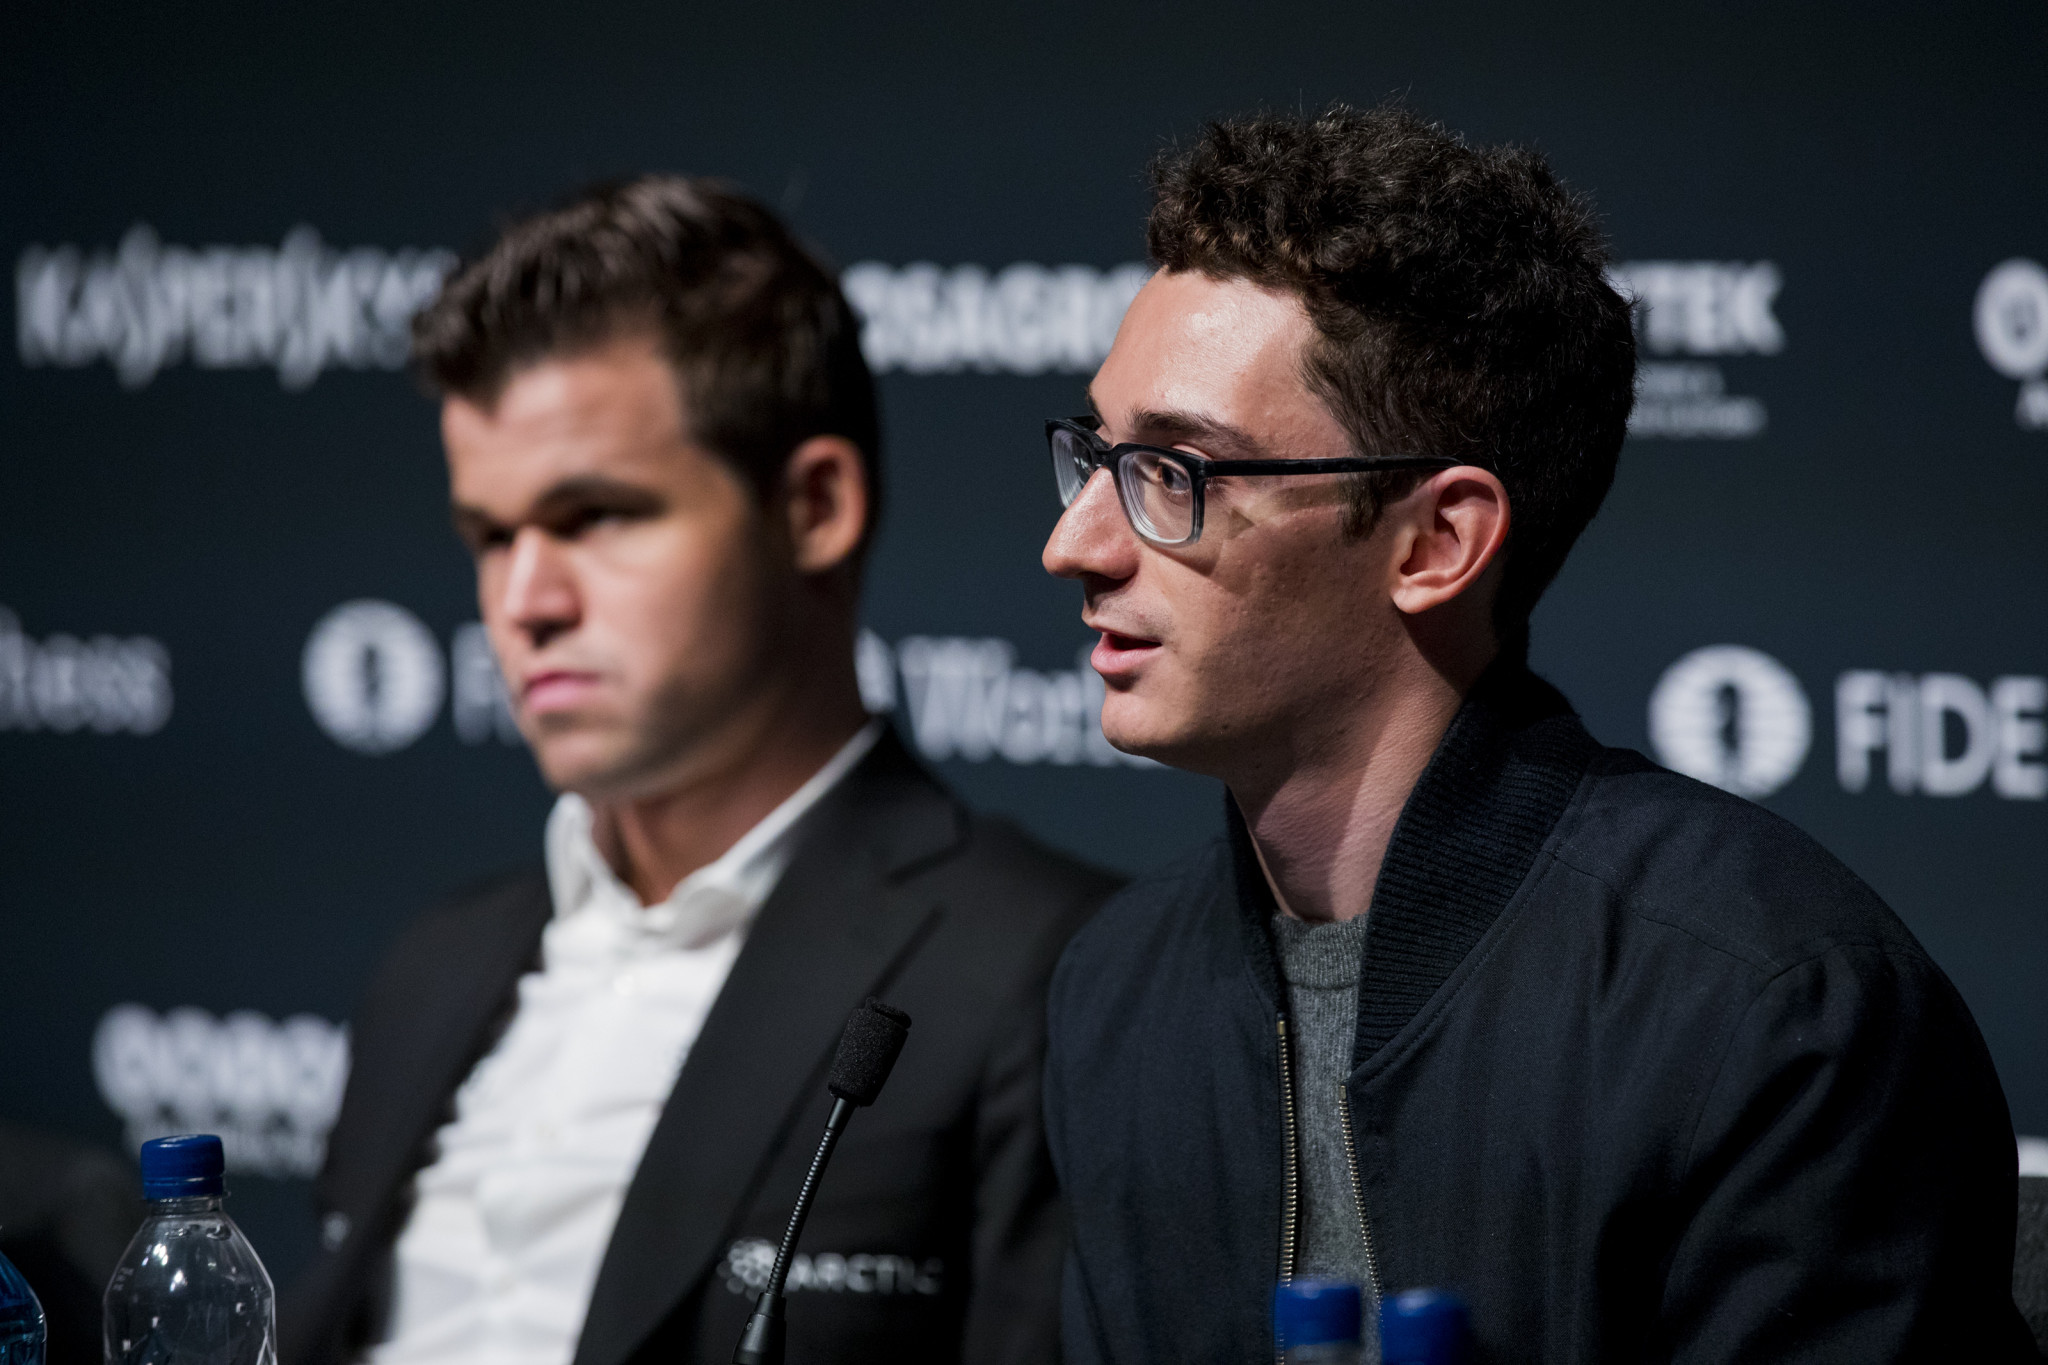 Carlsen set to defend world chess title against Caruana as women's champion Ju's title defence proceeds smoothly